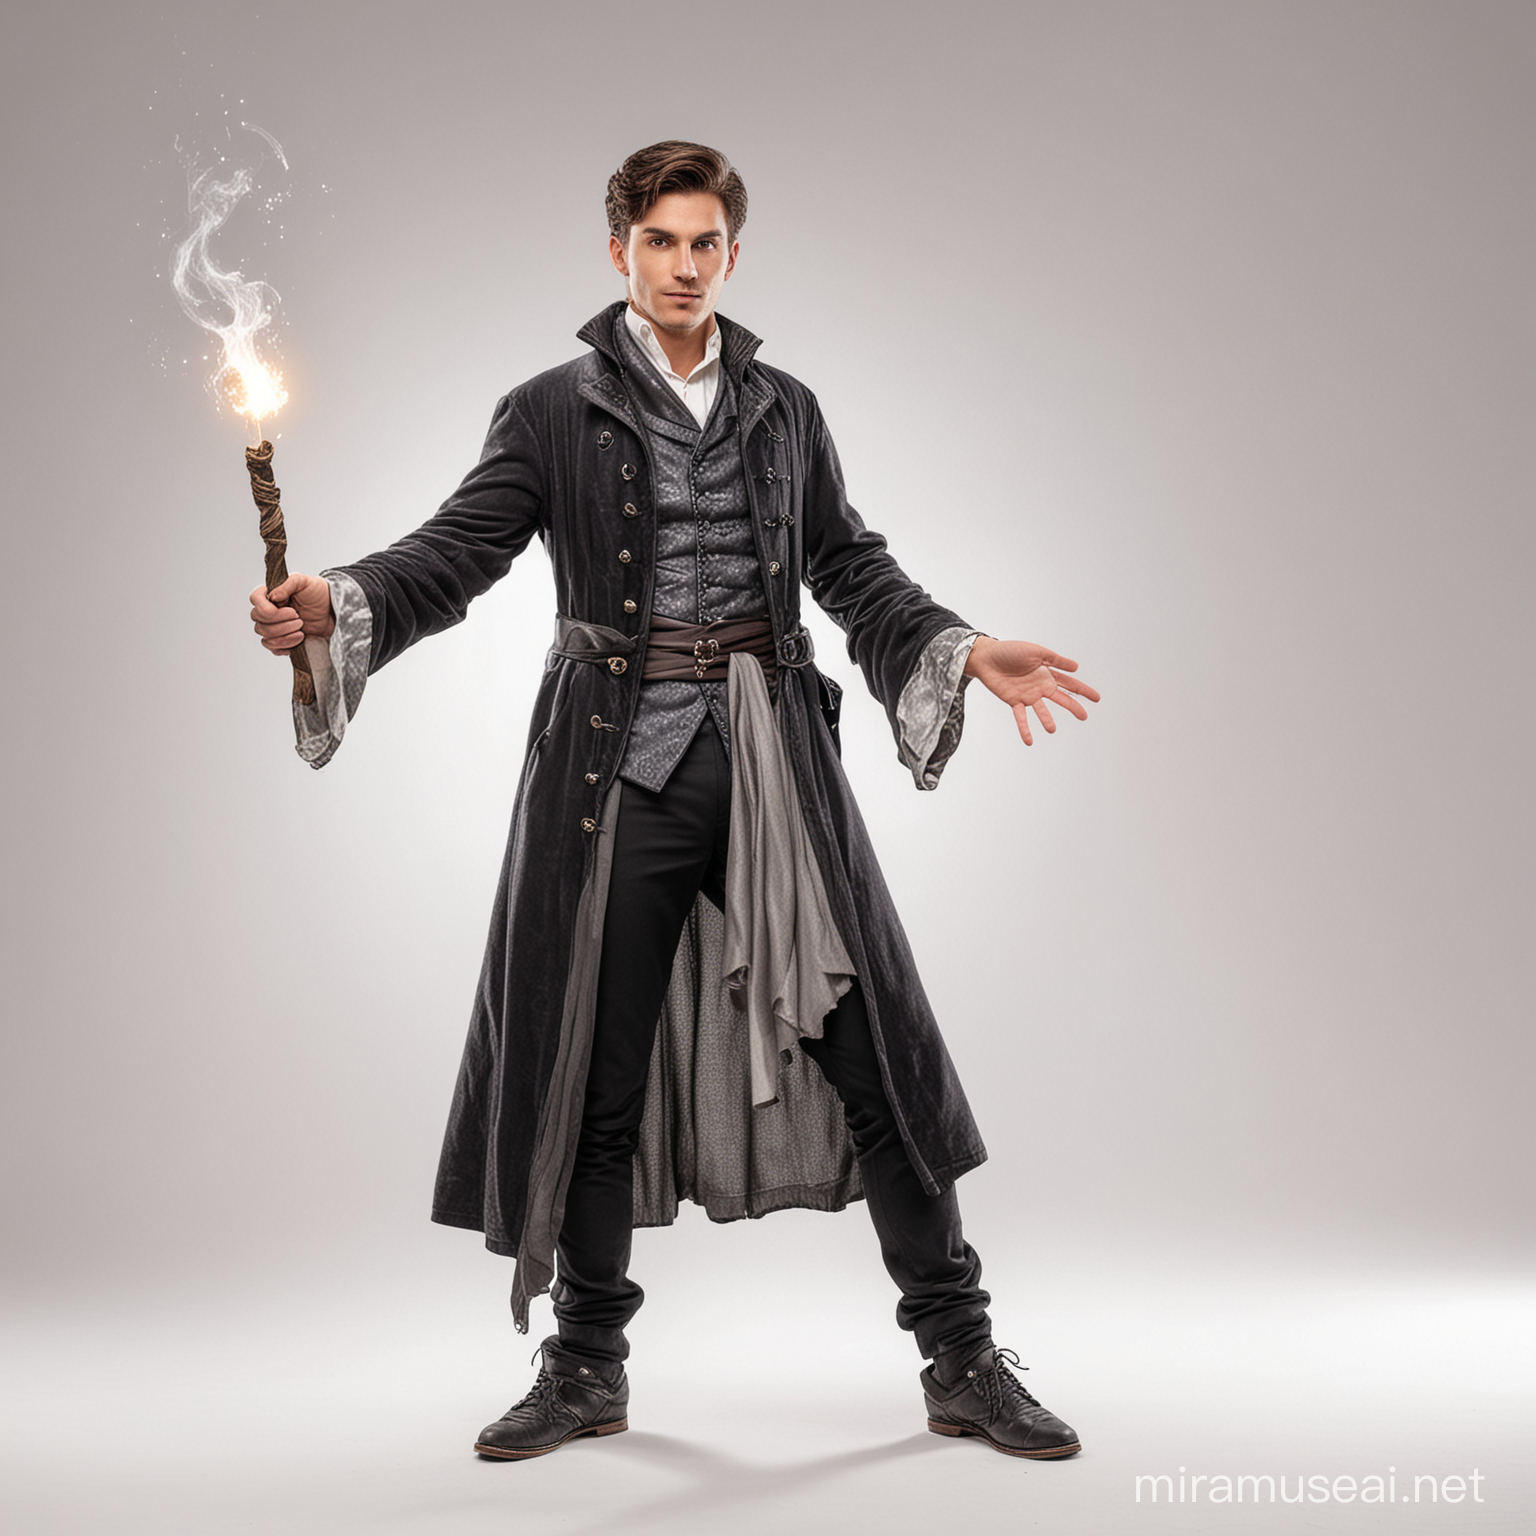 male magic user, white background, full body, wand, casting a spell